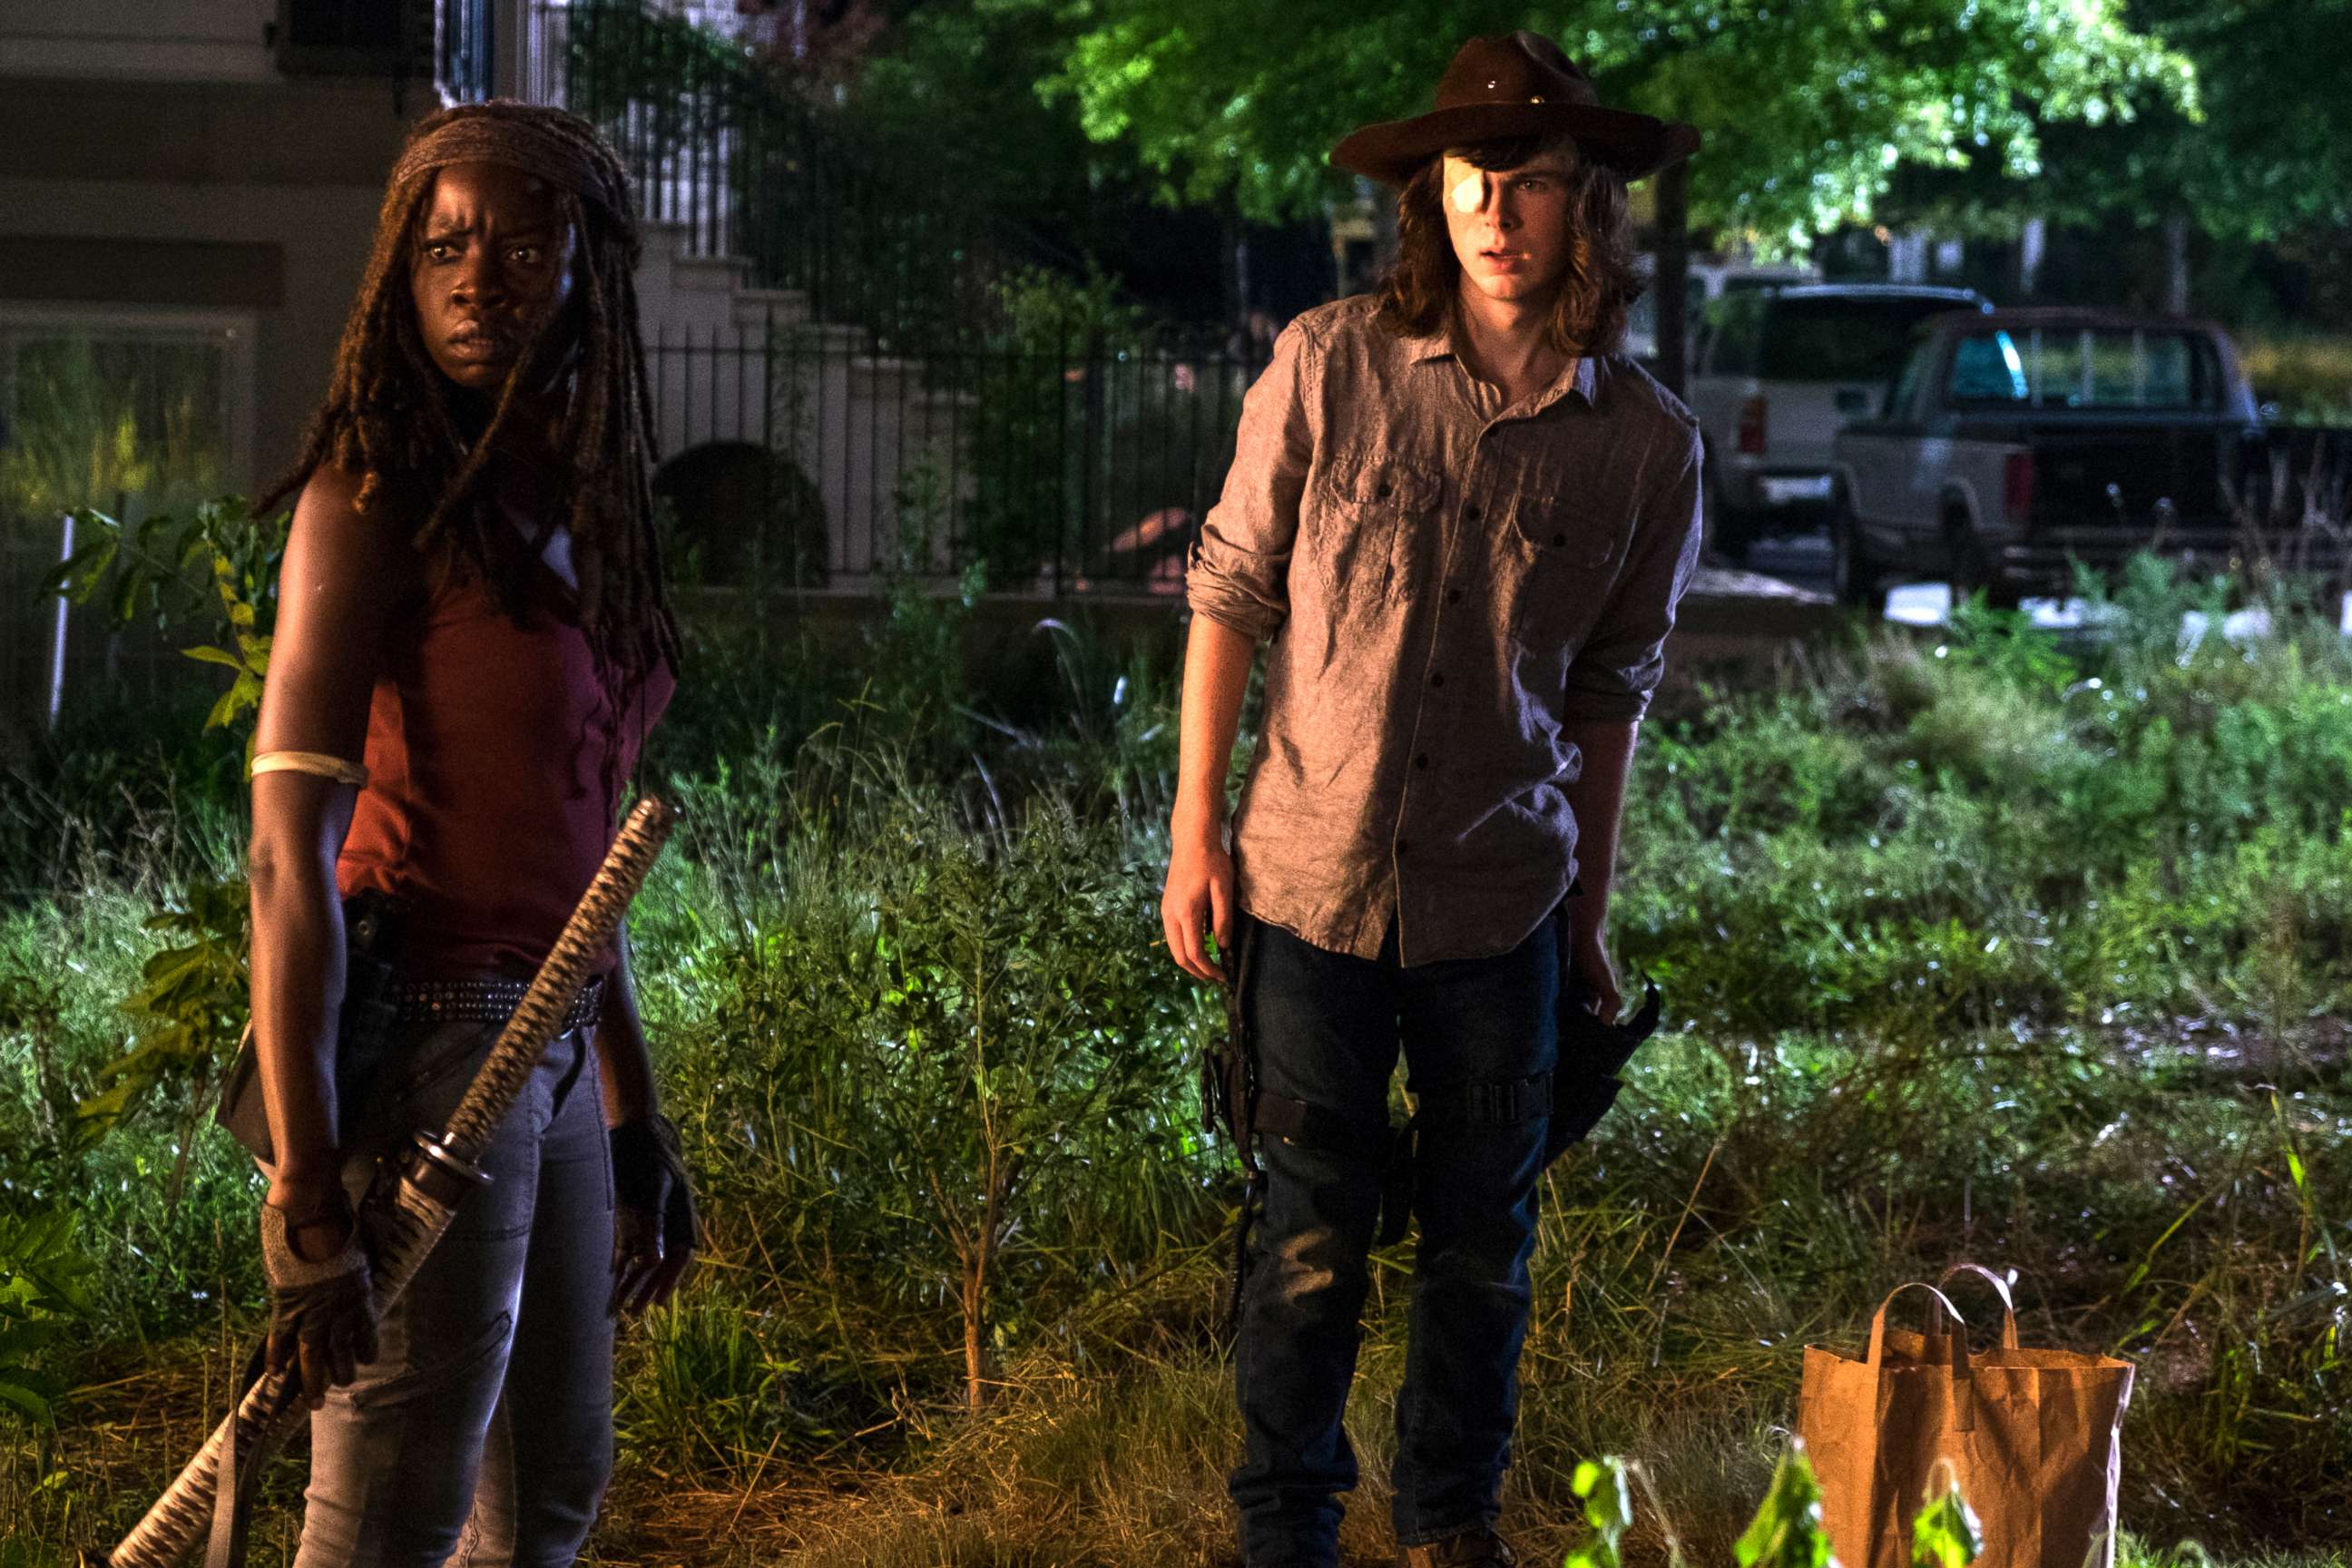 PHOTO: Chandler Riggs as Carl Grimes and Danai Gurira as Michonne in an episode from "The Walking Dead."